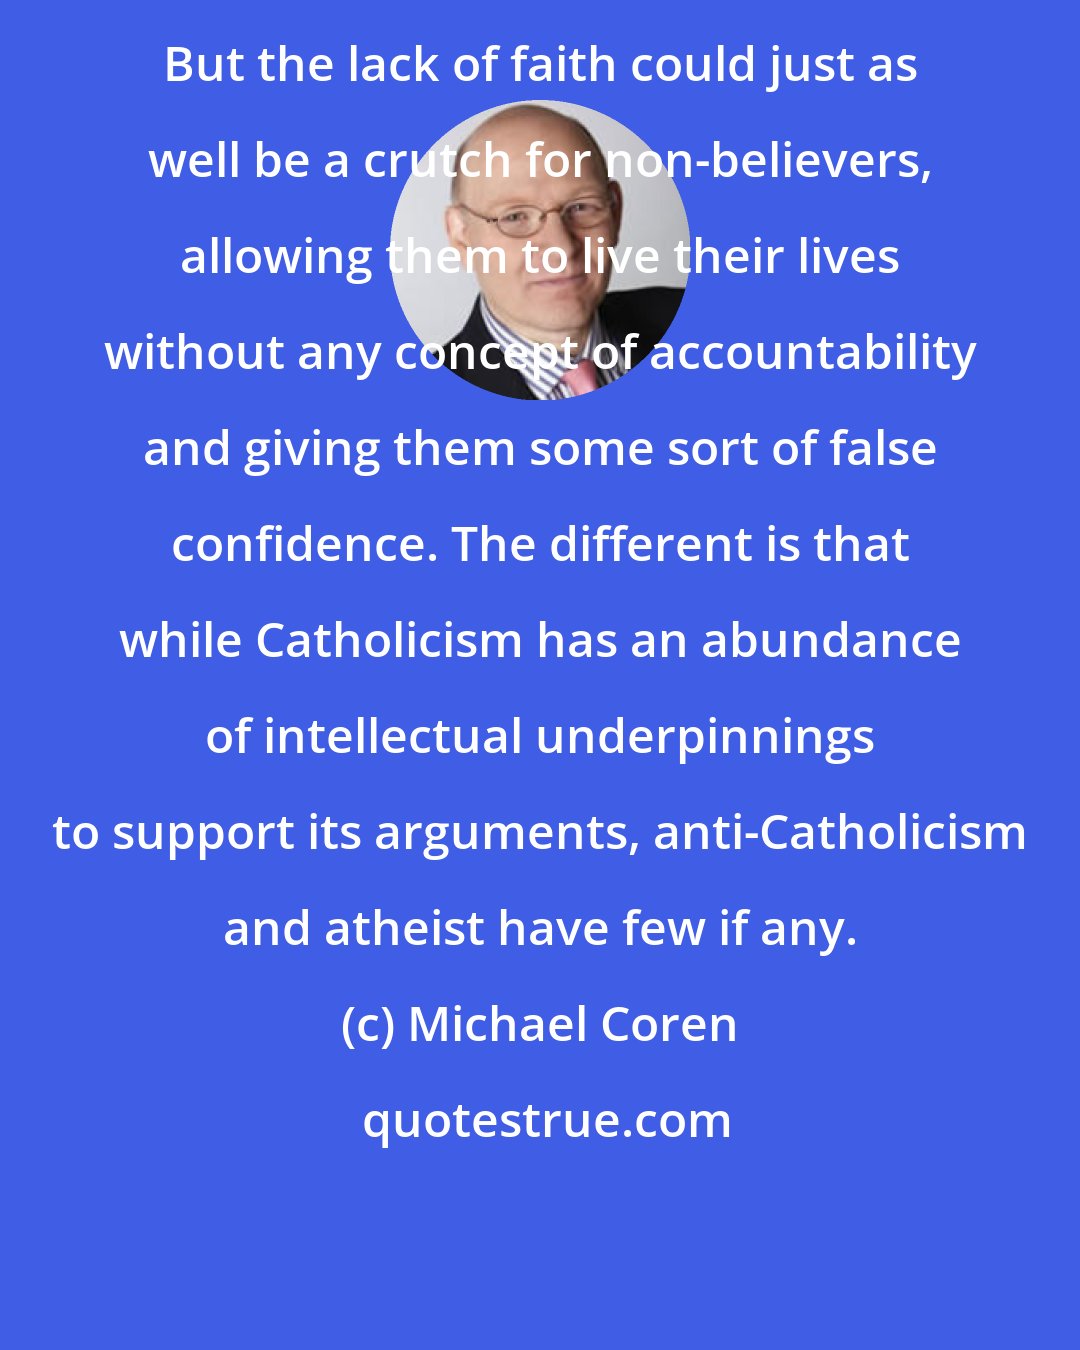 Michael Coren: But the lack of faith could just as well be a crutch for non-believers, allowing them to live their lives without any concept of accountability and giving them some sort of false confidence. The different is that while Catholicism has an abundance of intellectual underpinnings to support its arguments, anti-Catholicism and atheist have few if any.